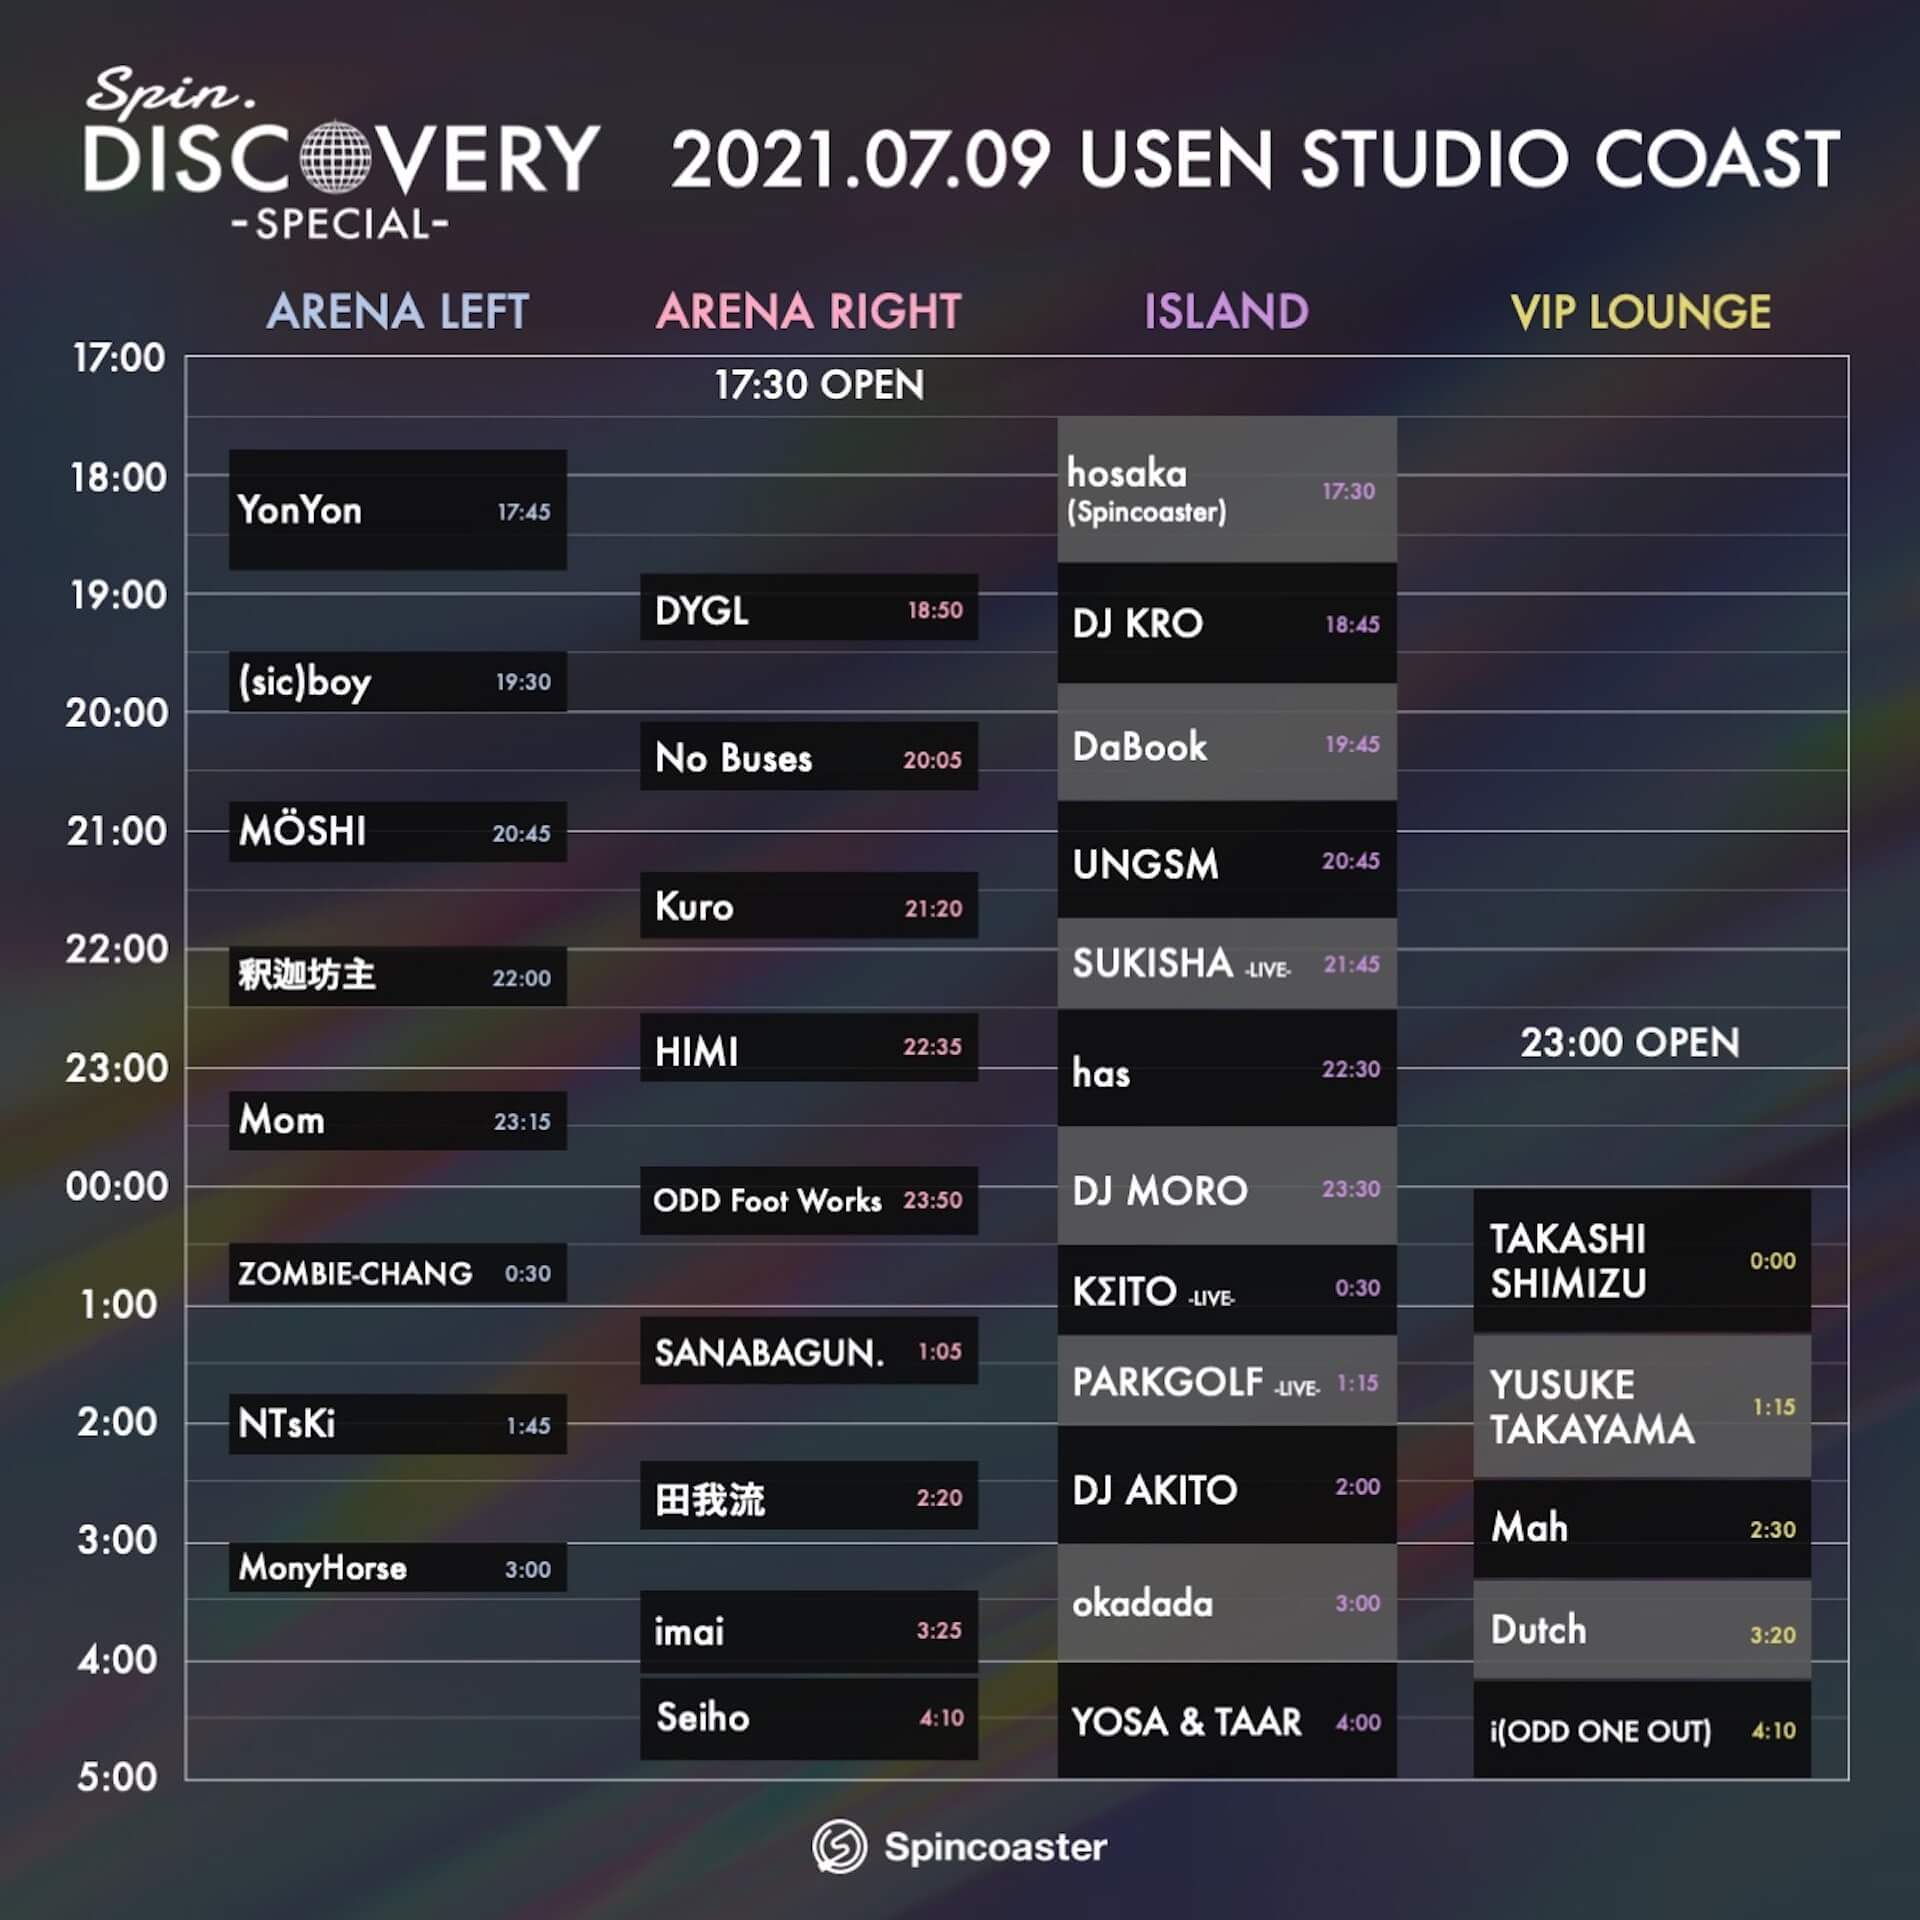 ＜SPIN.DISCOVERY -SPECIAL-＞の第2弾出演アーティストが発表！SANABAGUN.、Momなど8組が登場 music210630_spindiscovery_9